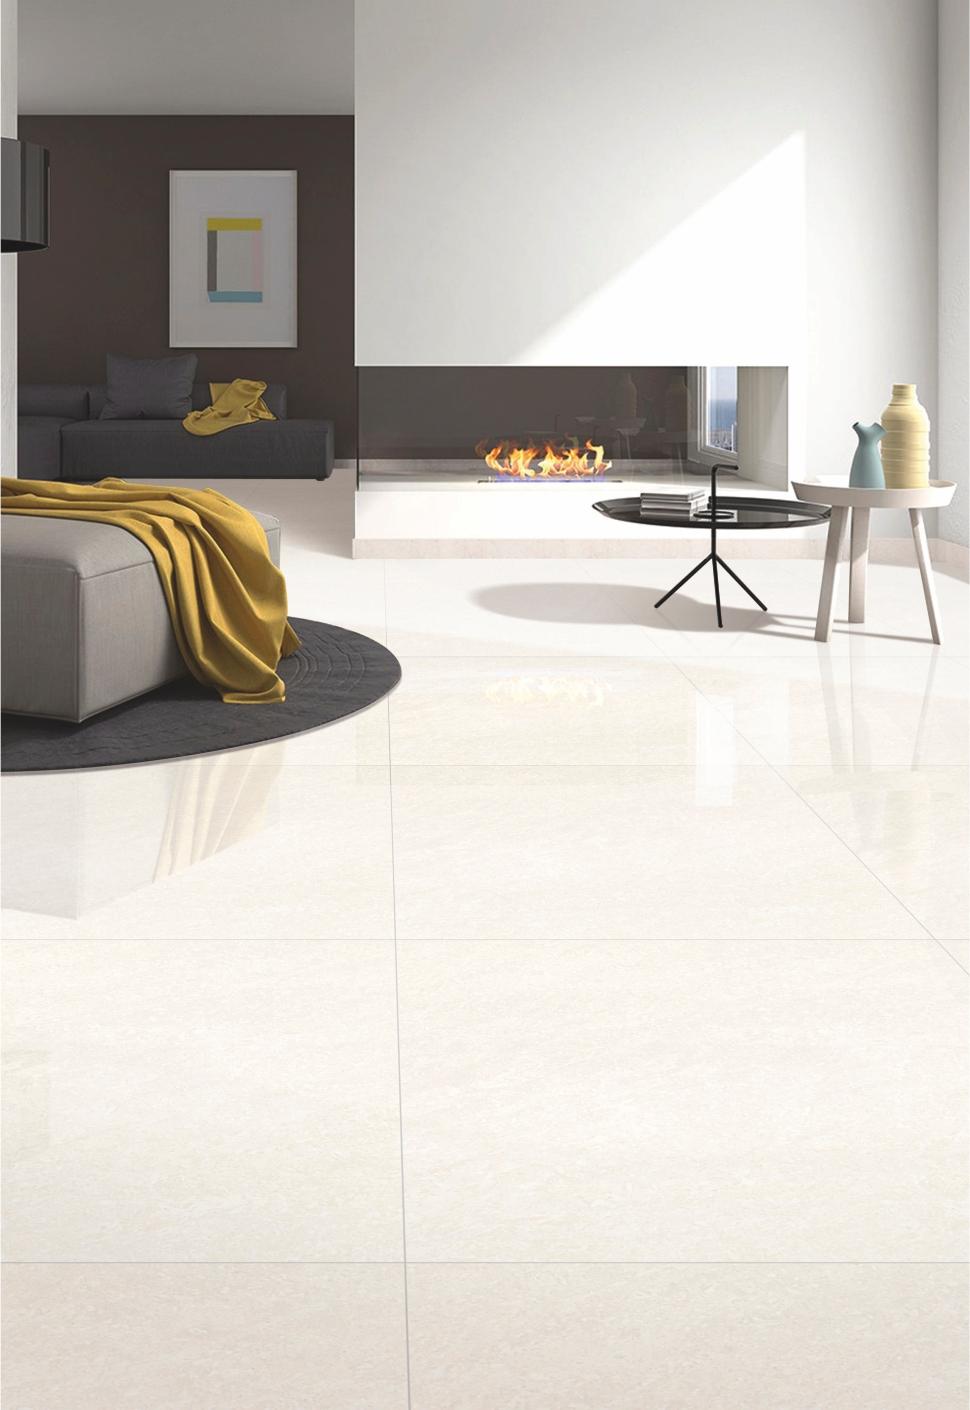 How To Select Tiles For The Living Room, How To Choose Tile For Living Room